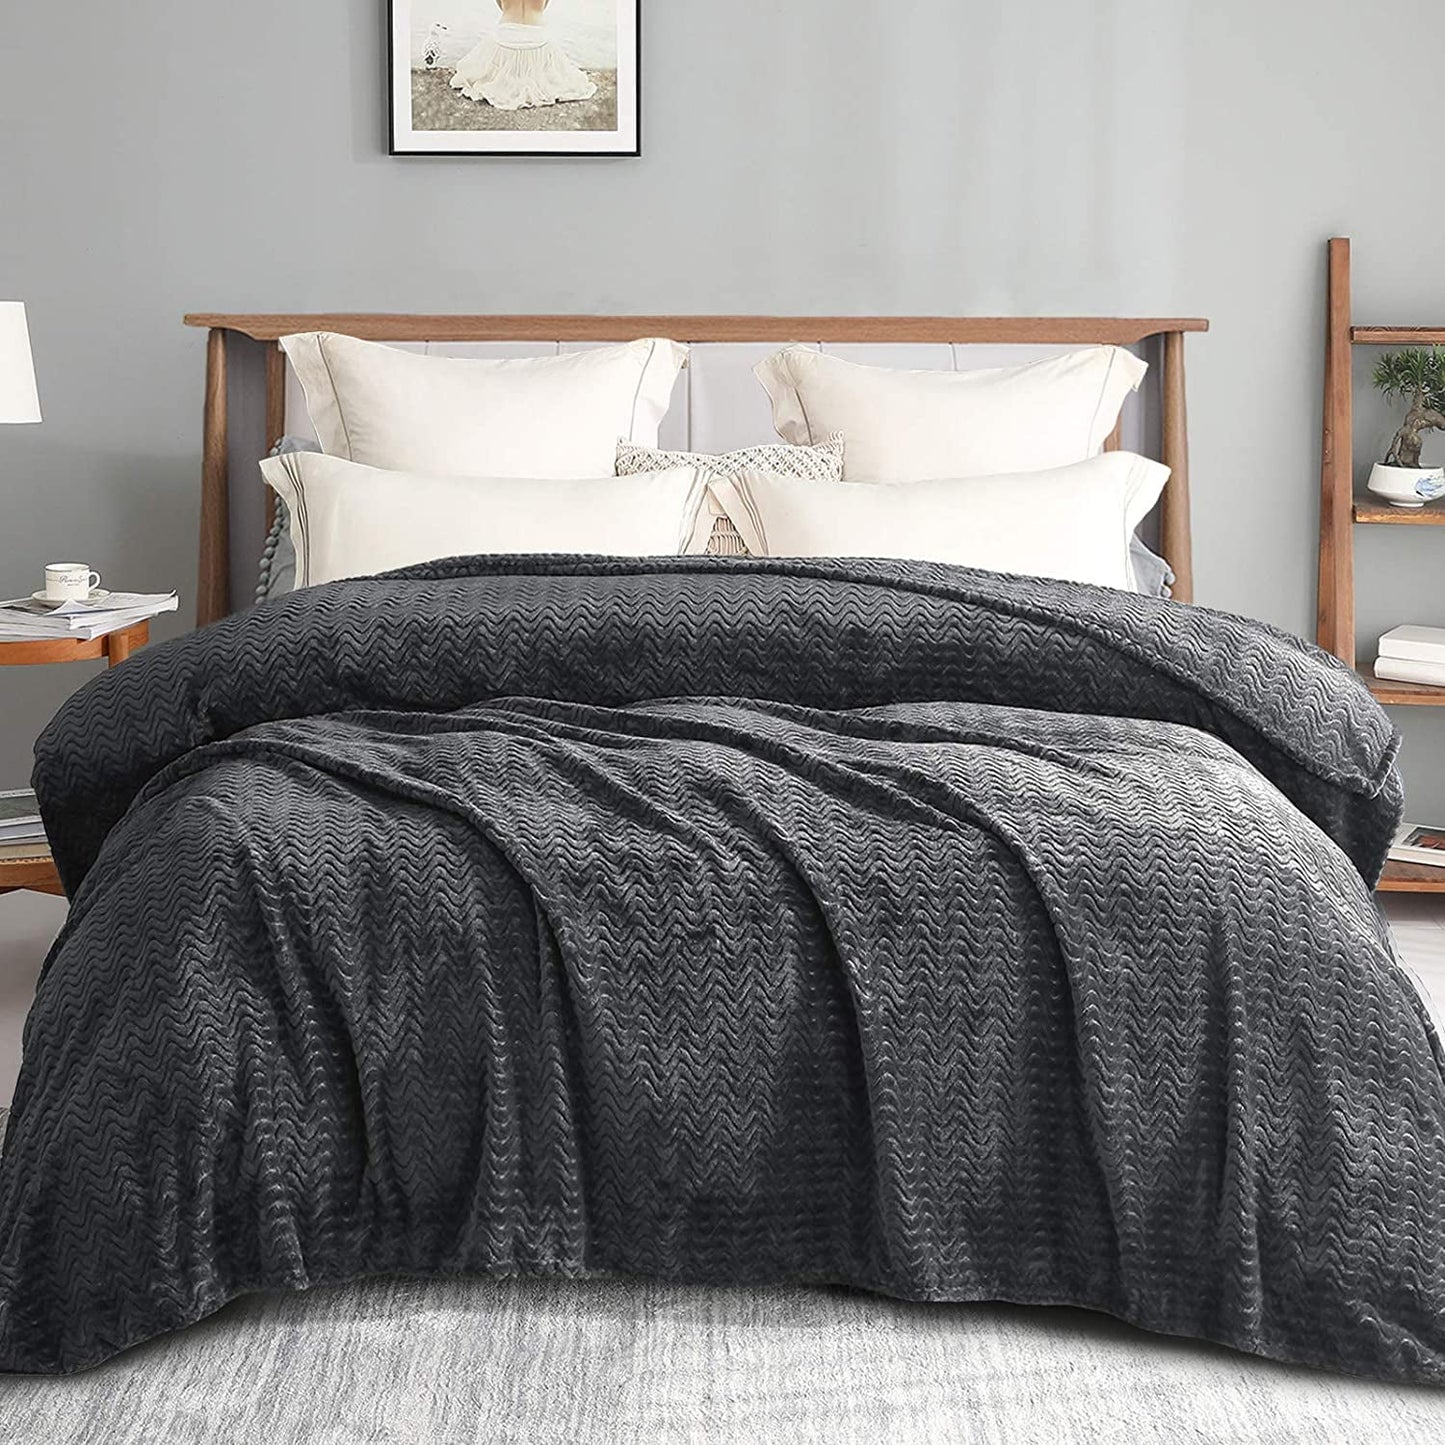 Exclusivo Mezcla Queen Size Jacquard Weave Wave Pattern Flannel Fleece Velvet Plush Bed Blanket as Bedspread/Coverlet/Bed Cover (90" x 90", Grey) - Soft, Lightweight, Warm and Cozy